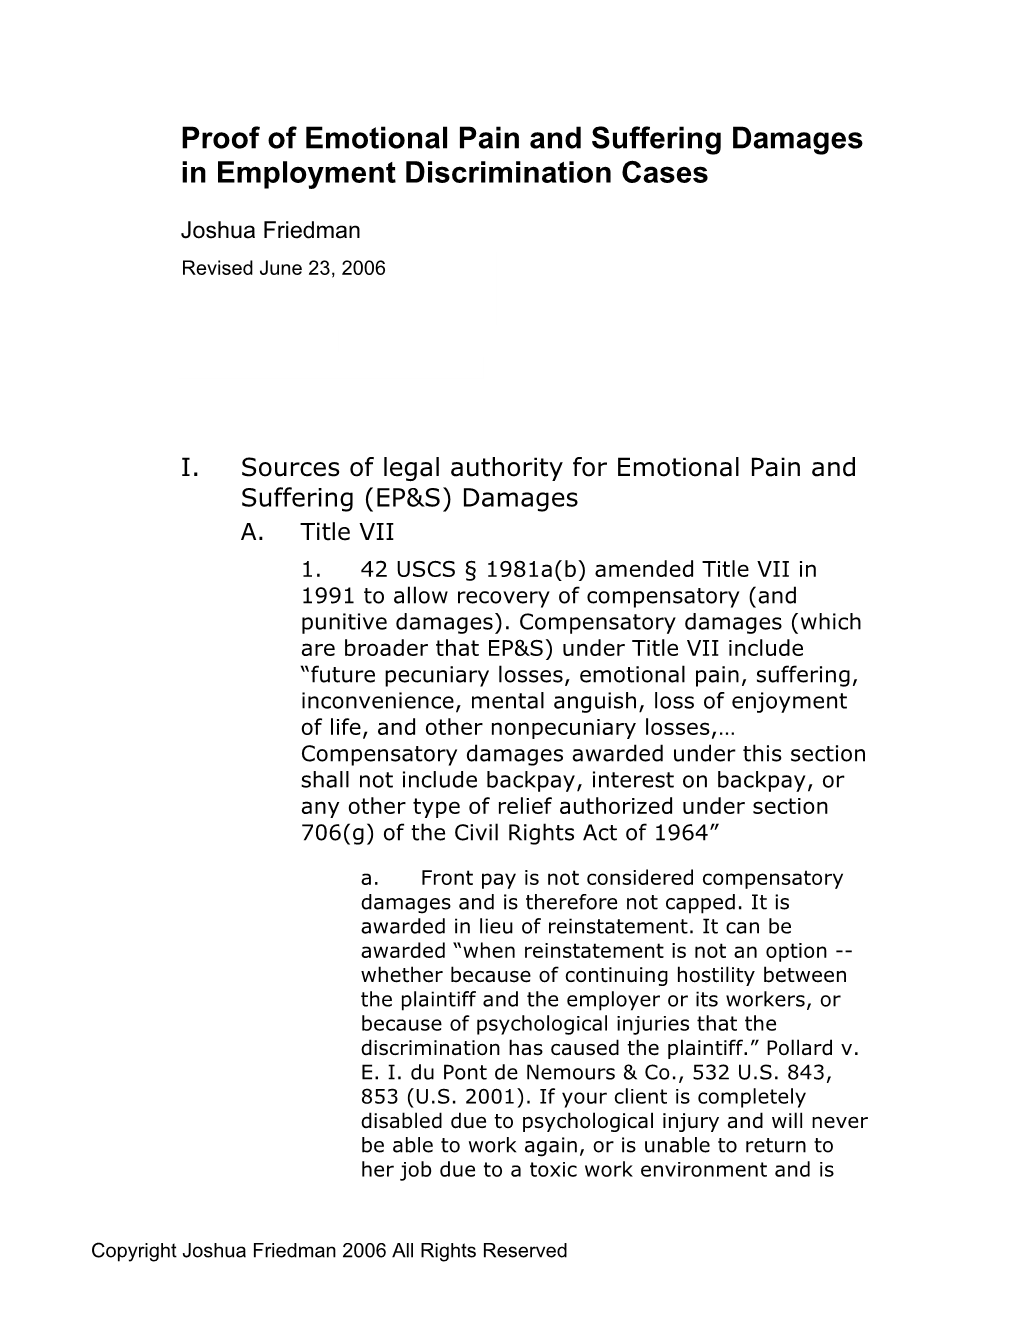 Proof of Emotional Pain and Suffering Damages in Employment Discrimination Cases